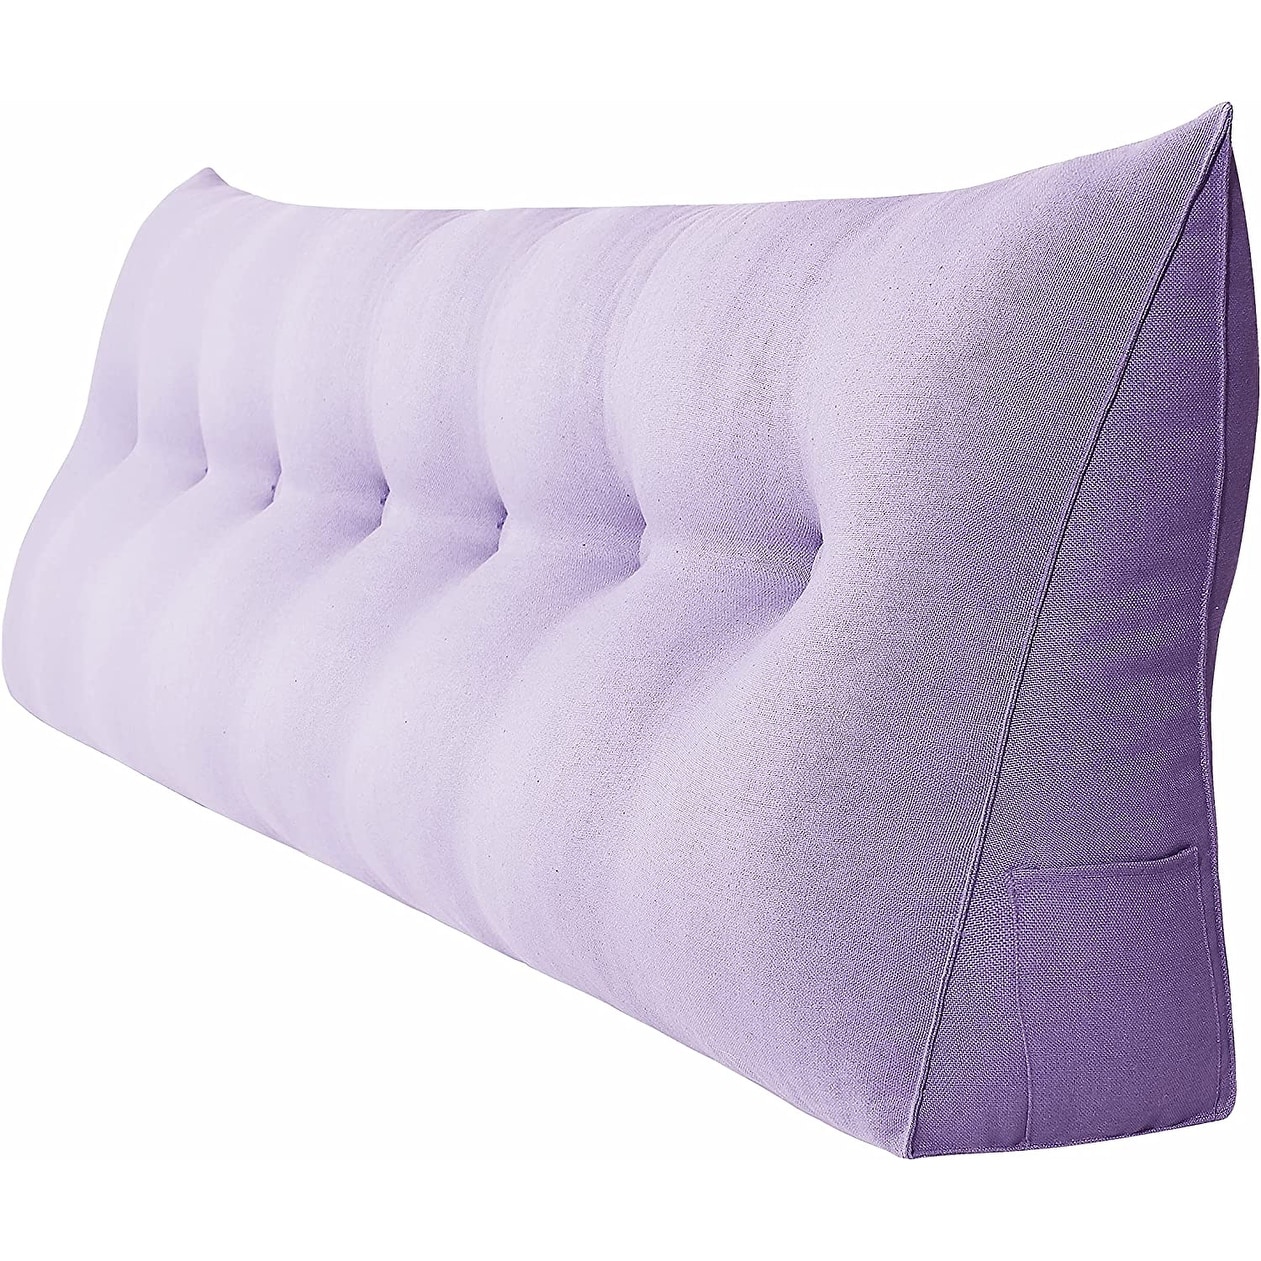 Klear Vu Velour Bed Rest Back Support Pillow with Pocket and Handle - On  Sale - Bed Bath & Beyond - 34074742